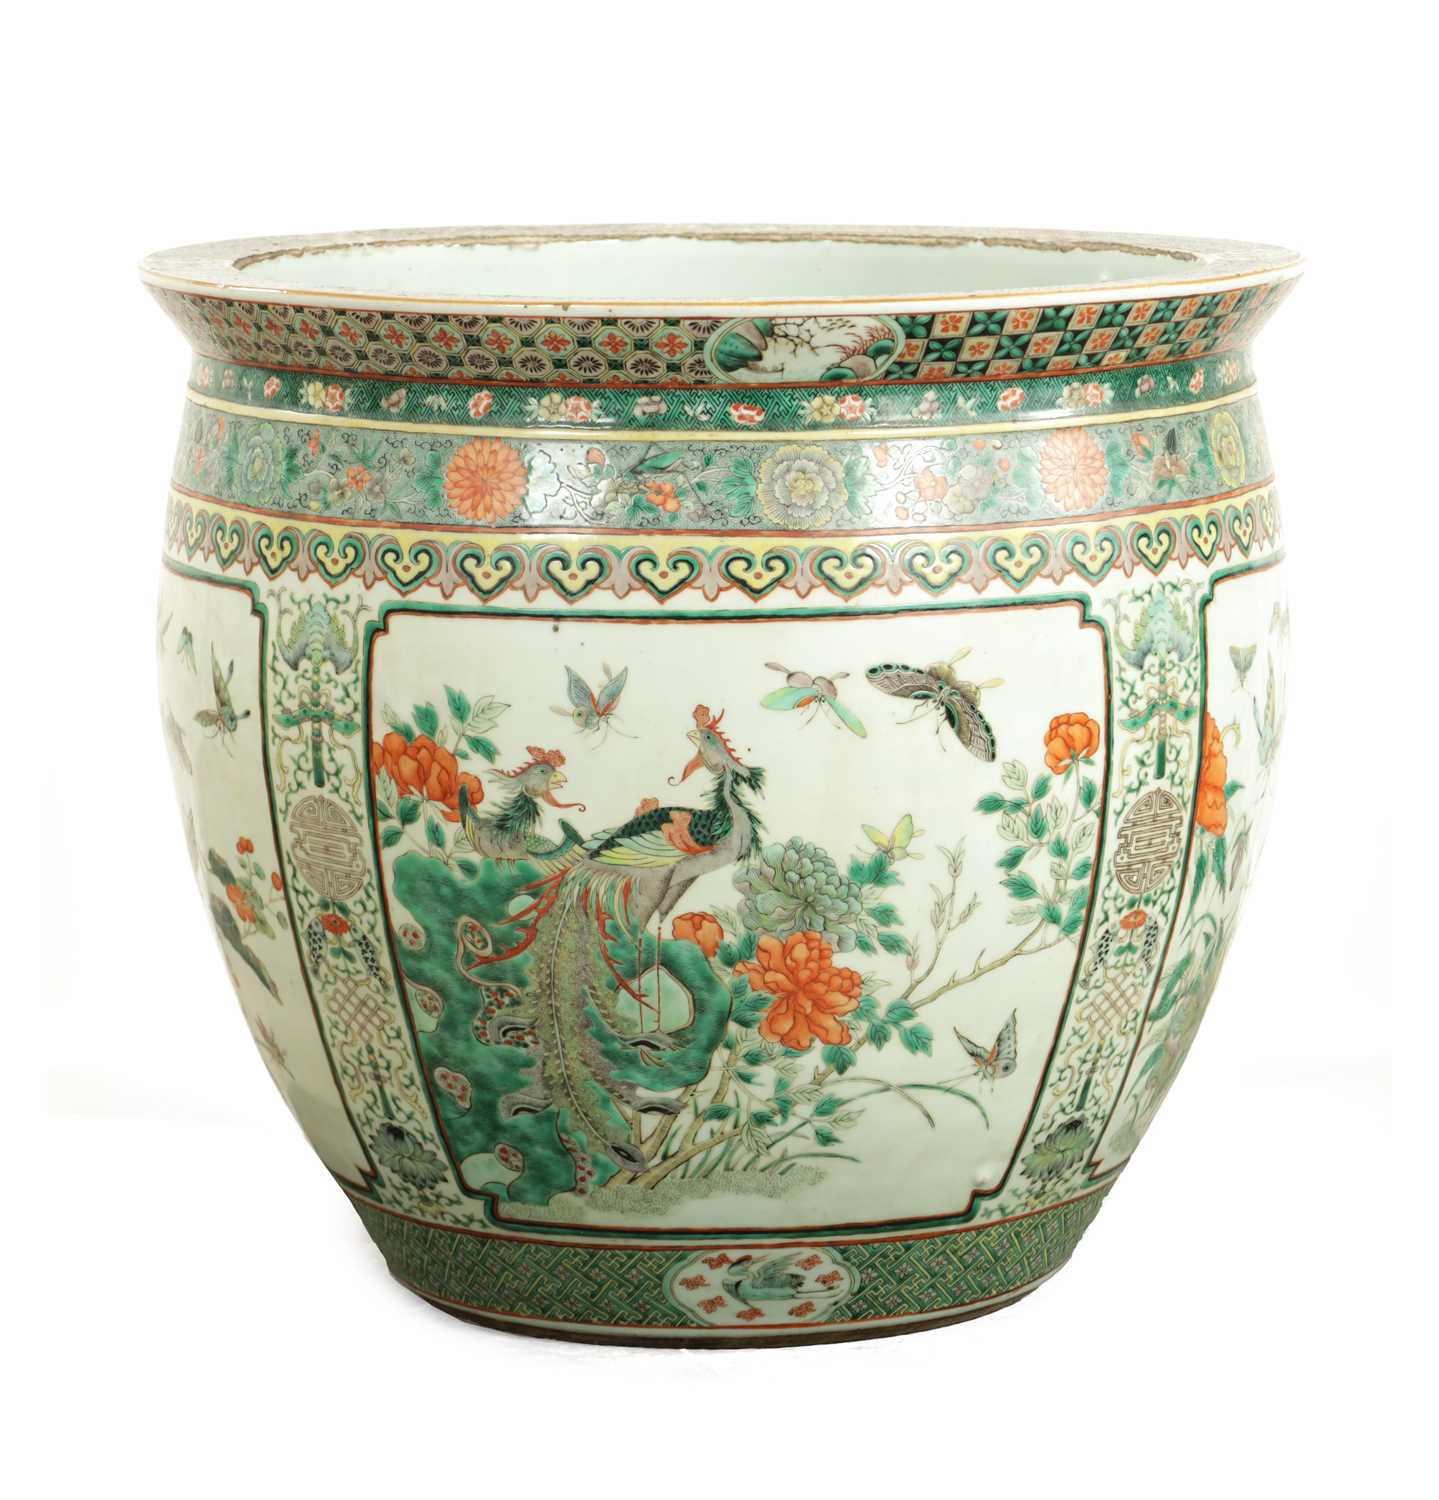 Lot 273 - A 19TH CENTURY CHINESE FAMILLE VERTE PORCELAIN JARDINIERE OF LARGE SIZE